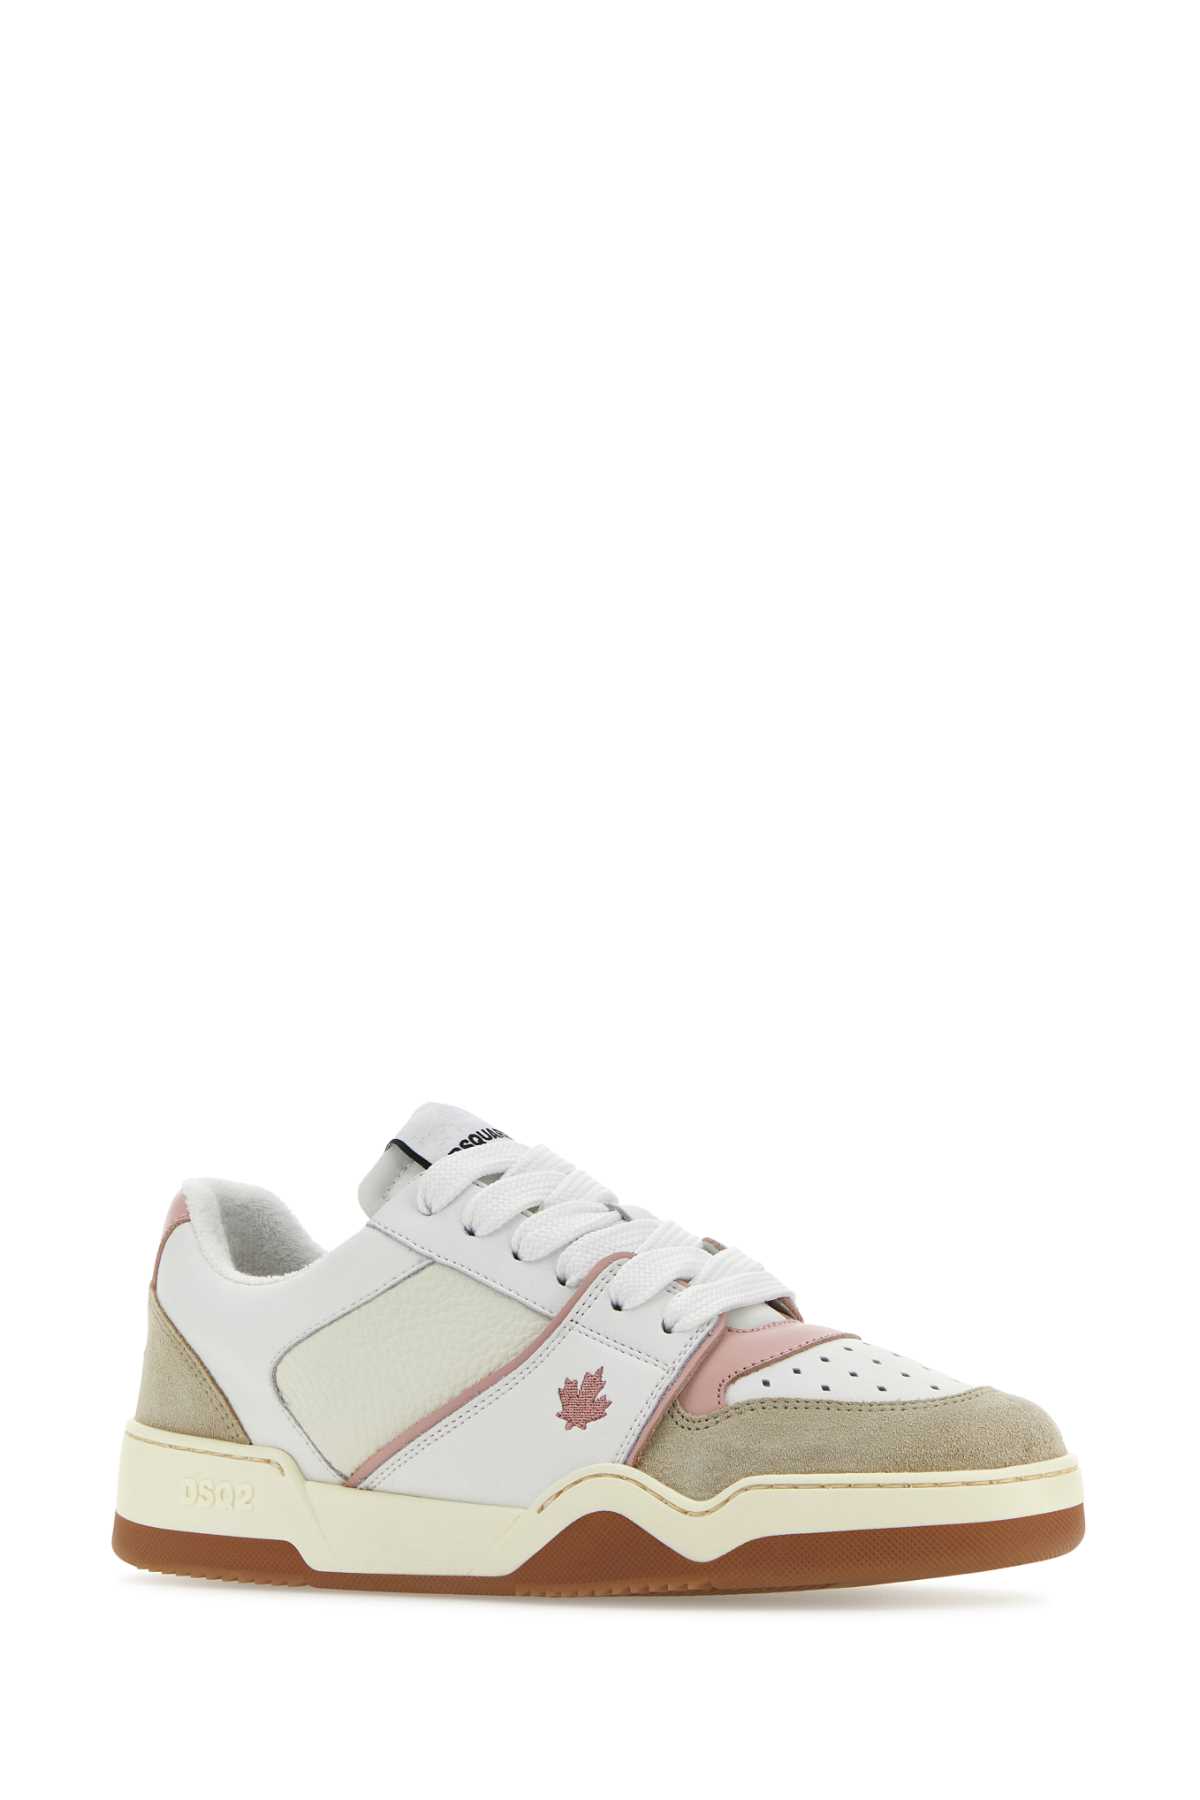 DSQUARED2 MULTIcolour LEATHER AND SUEDE SPIKER trainers